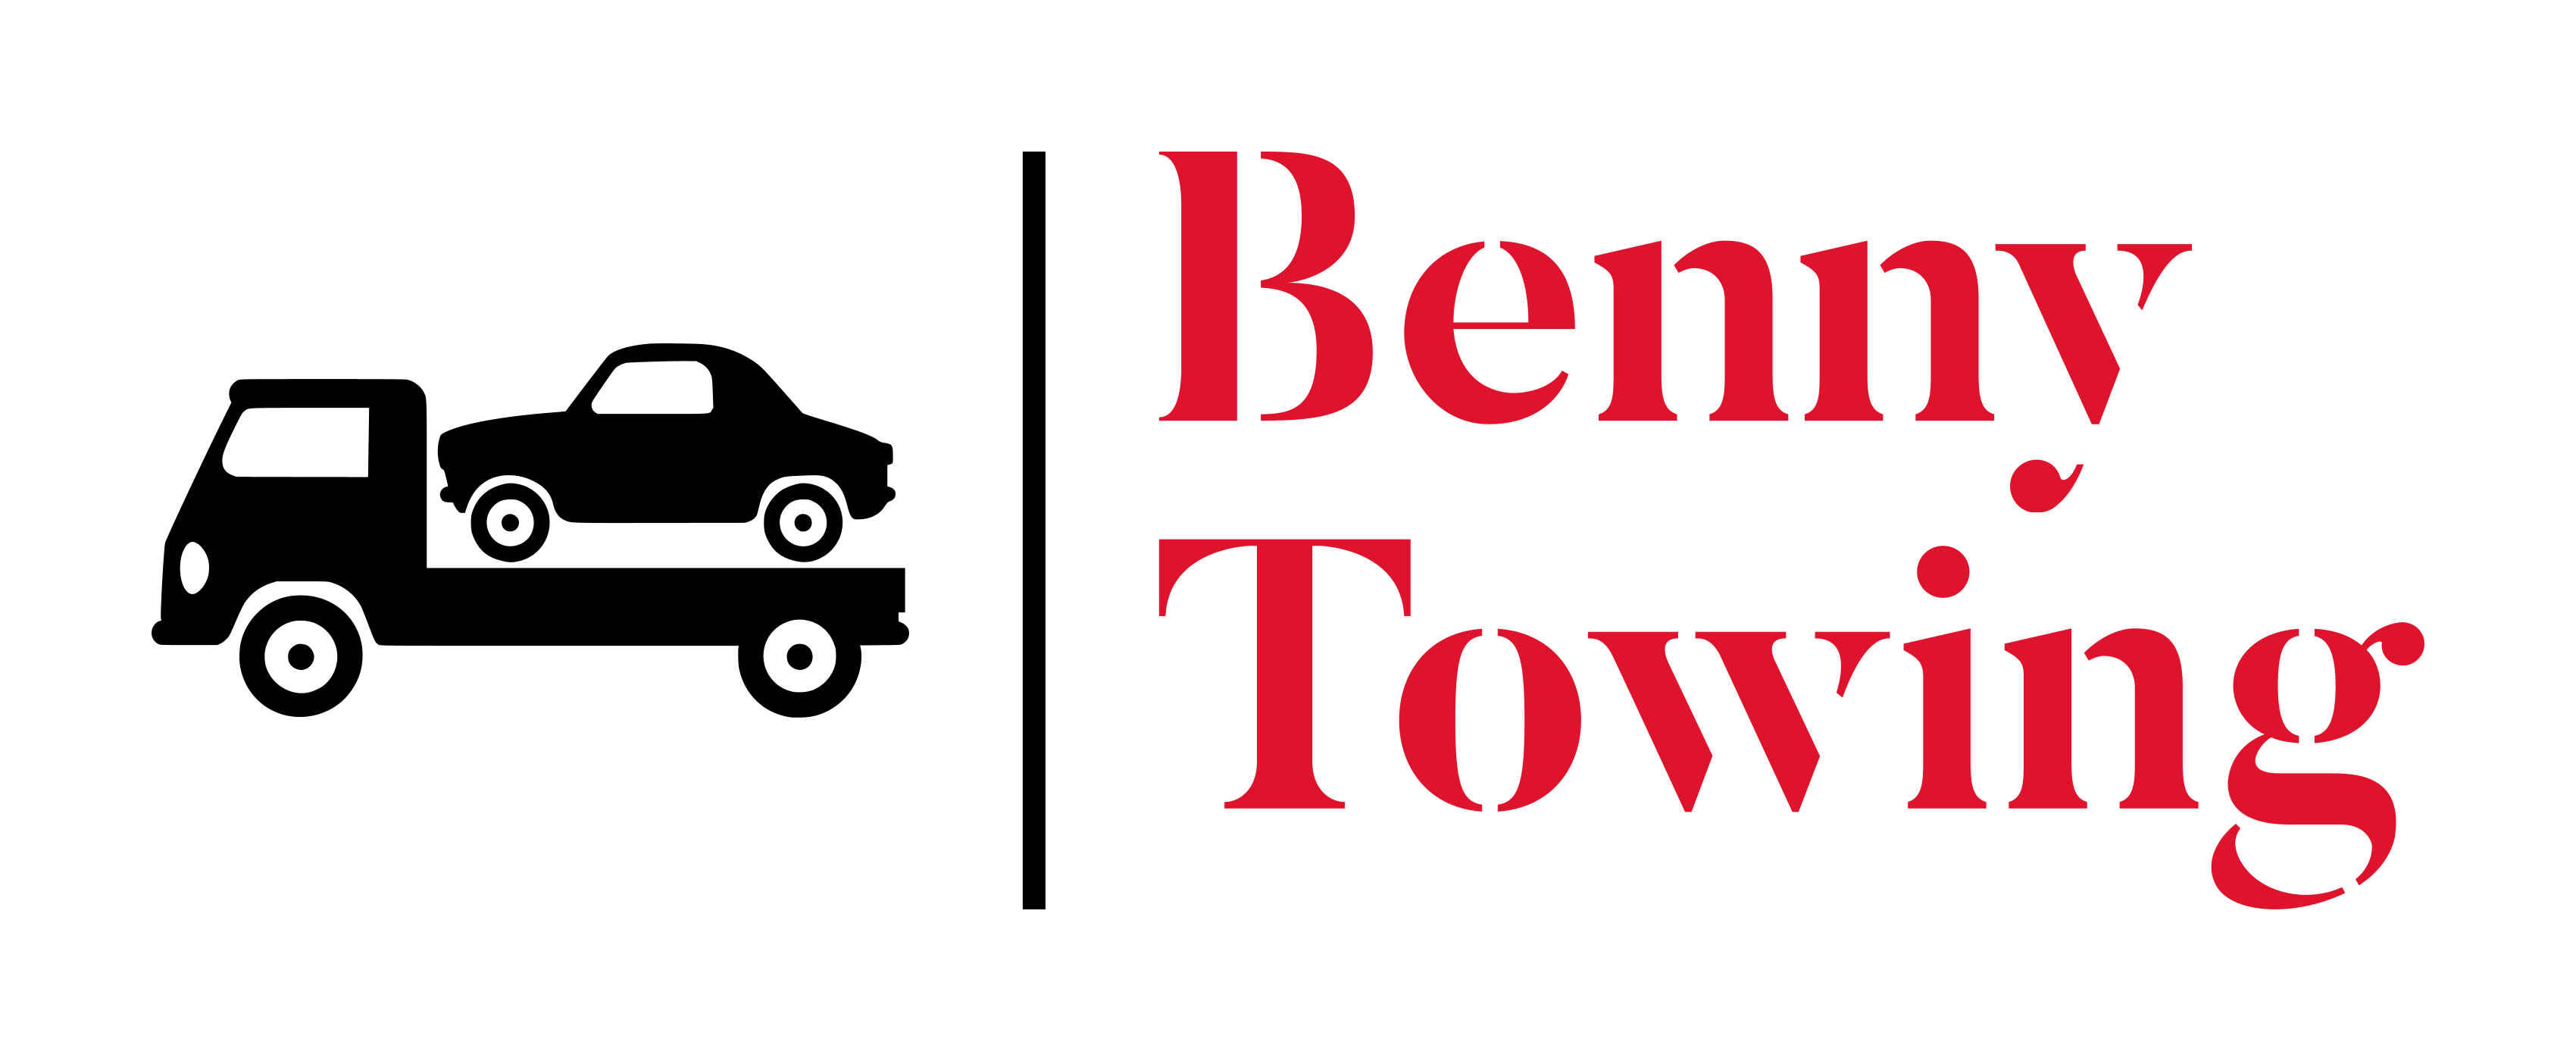 Benny Towing